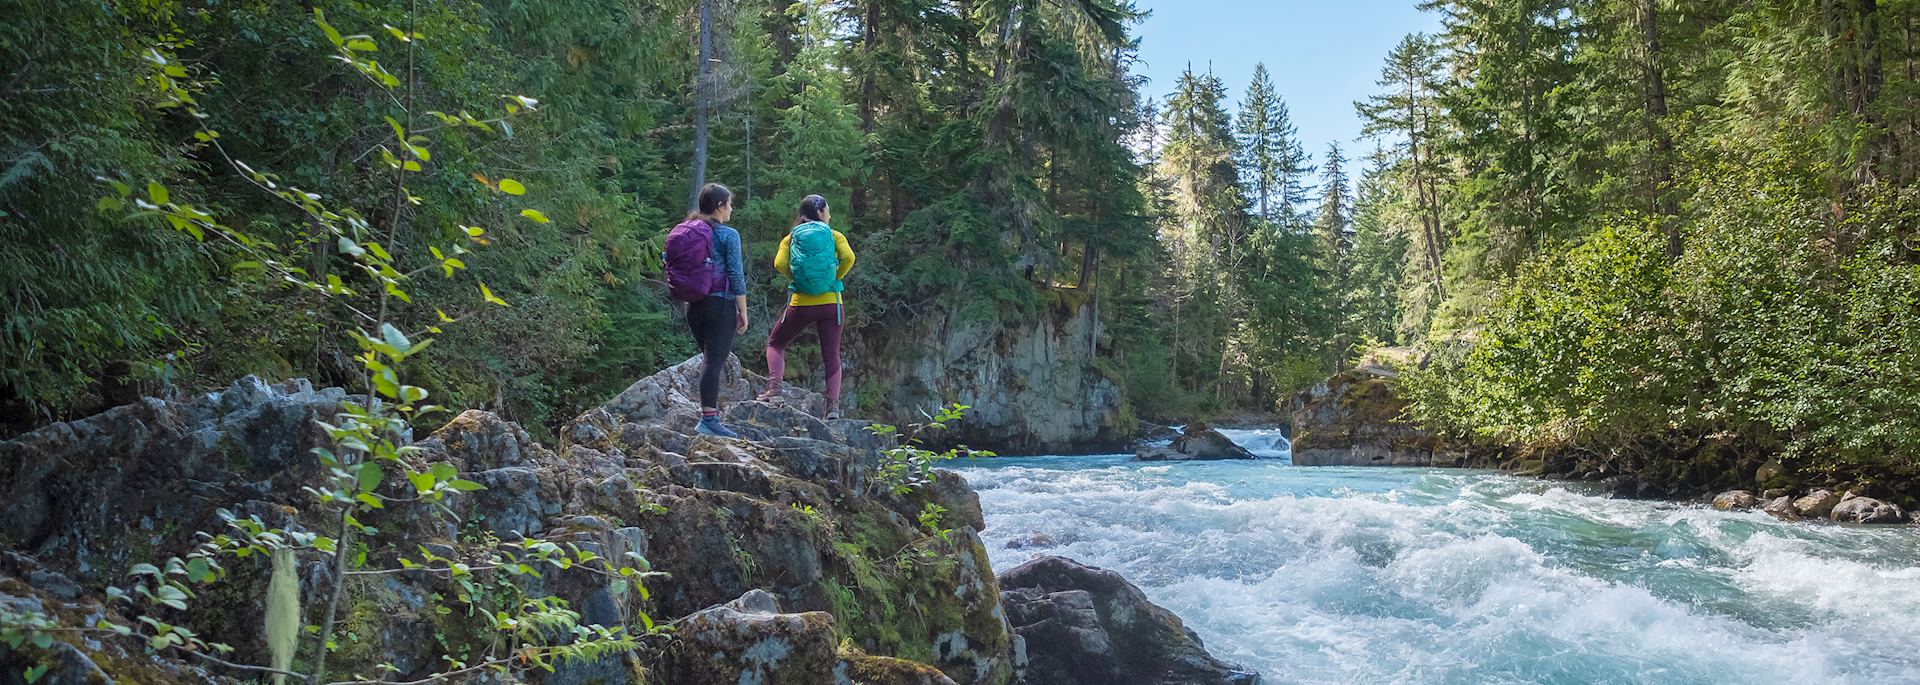 Hikers at the Cheakamus River, Whistler